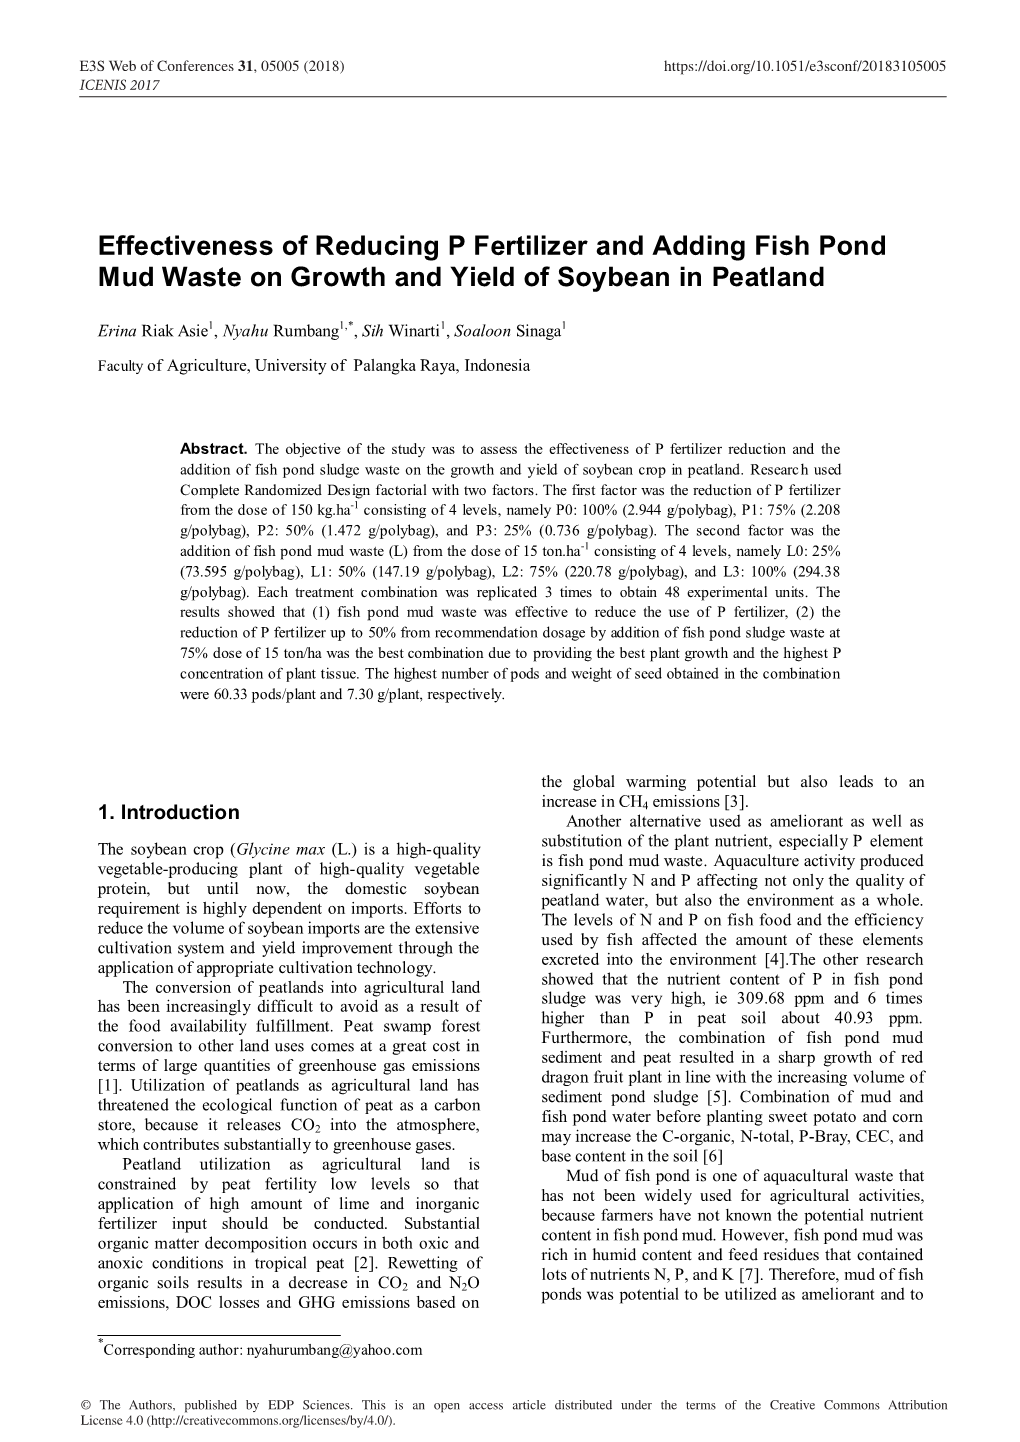 Effectiveness of Reducing P Fertilizer and Adding Fish Pond Mud Waste on Growth and Yield of Soybean in Peatland